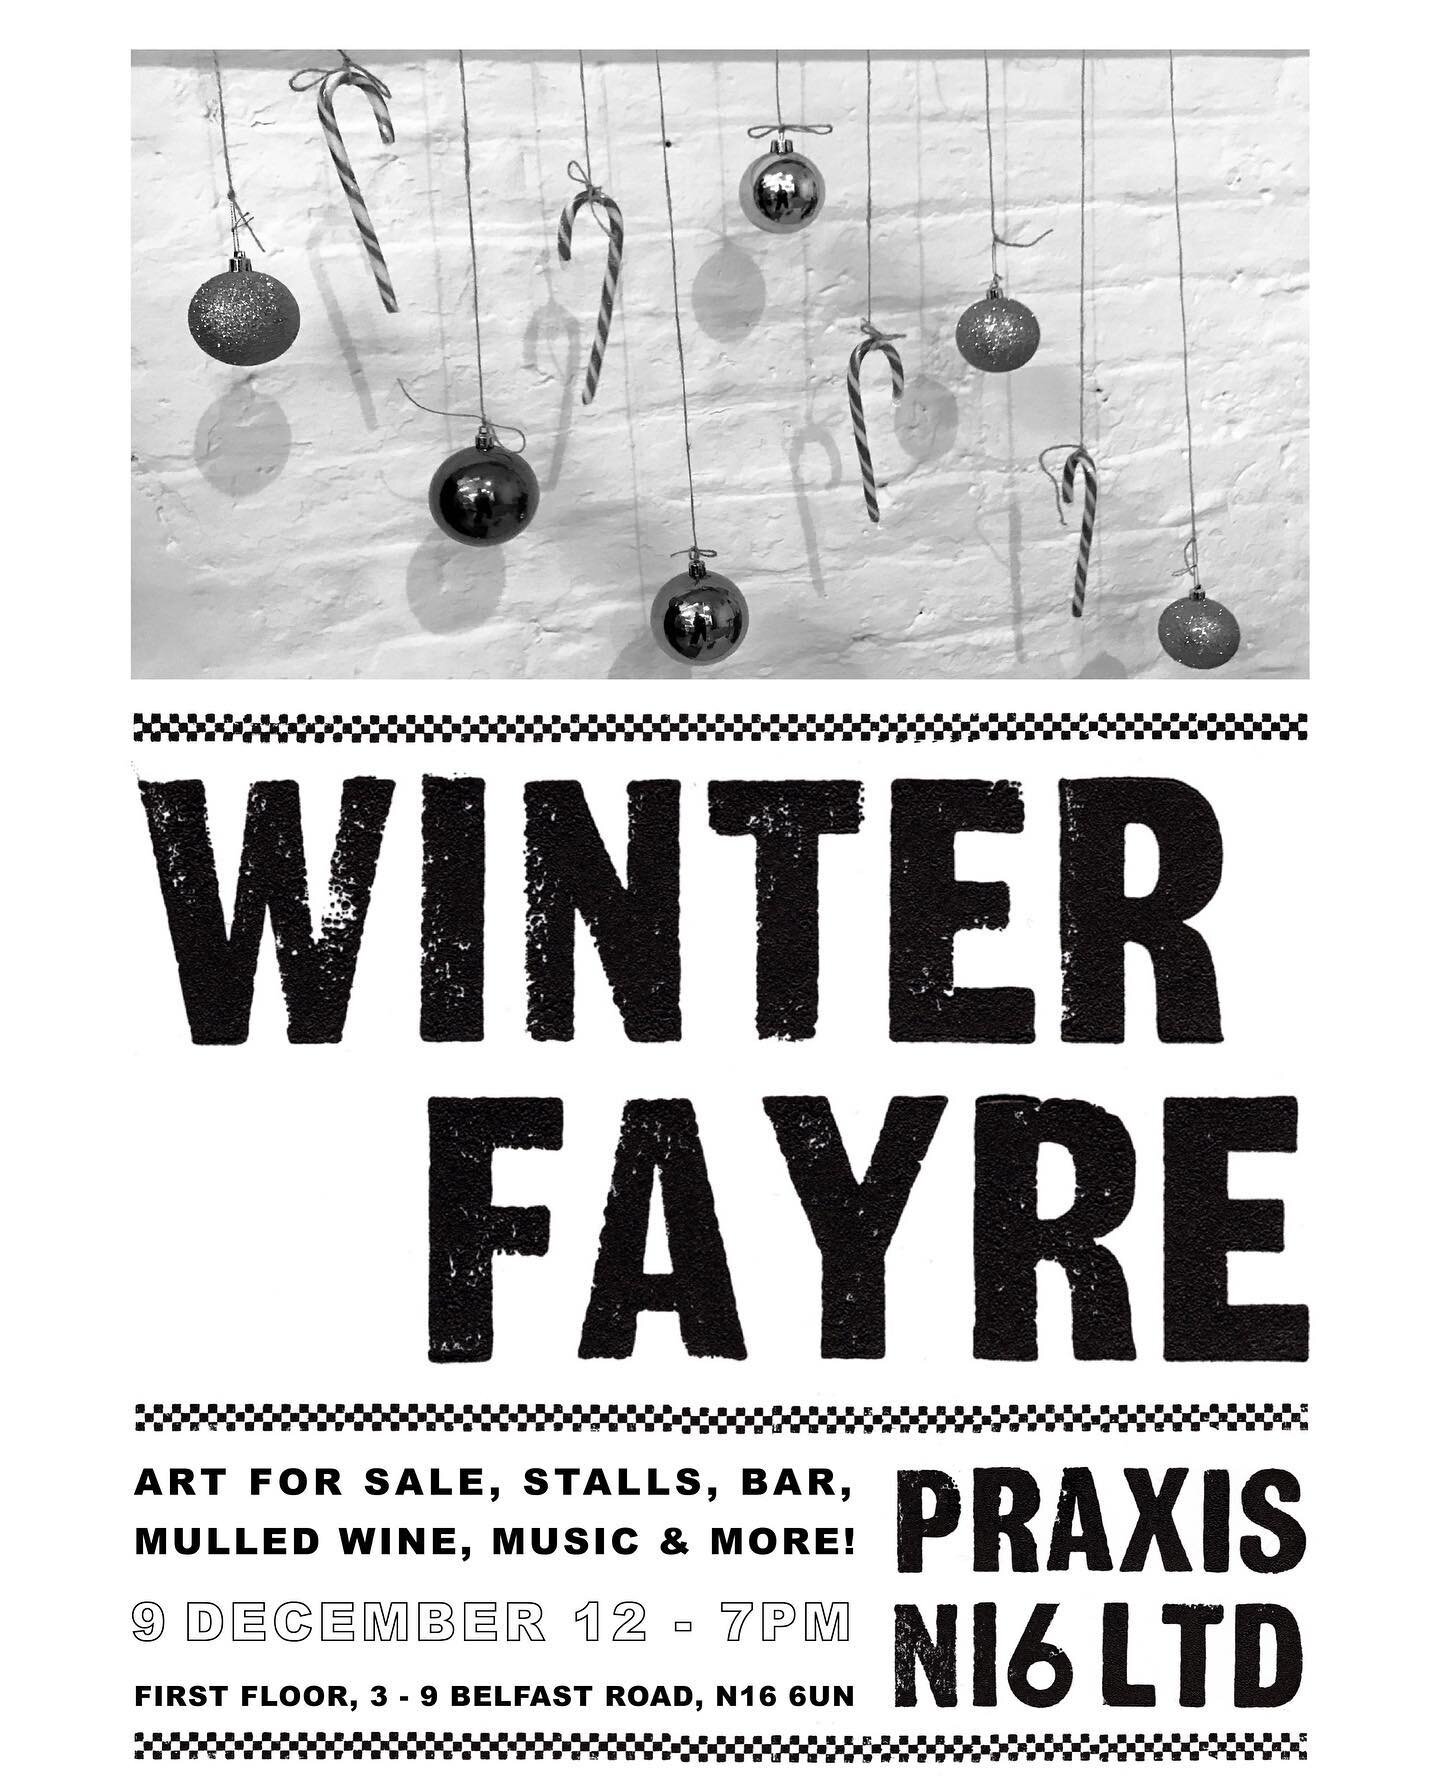 We are looking forward to opening our doors again on Saturday 9th December 12 - 7pm for our Winter Fayre and open studios! 

Our artists will have stalls selling original artwork work, prints, cards and more! 

We will have a bar with mulled wine amo